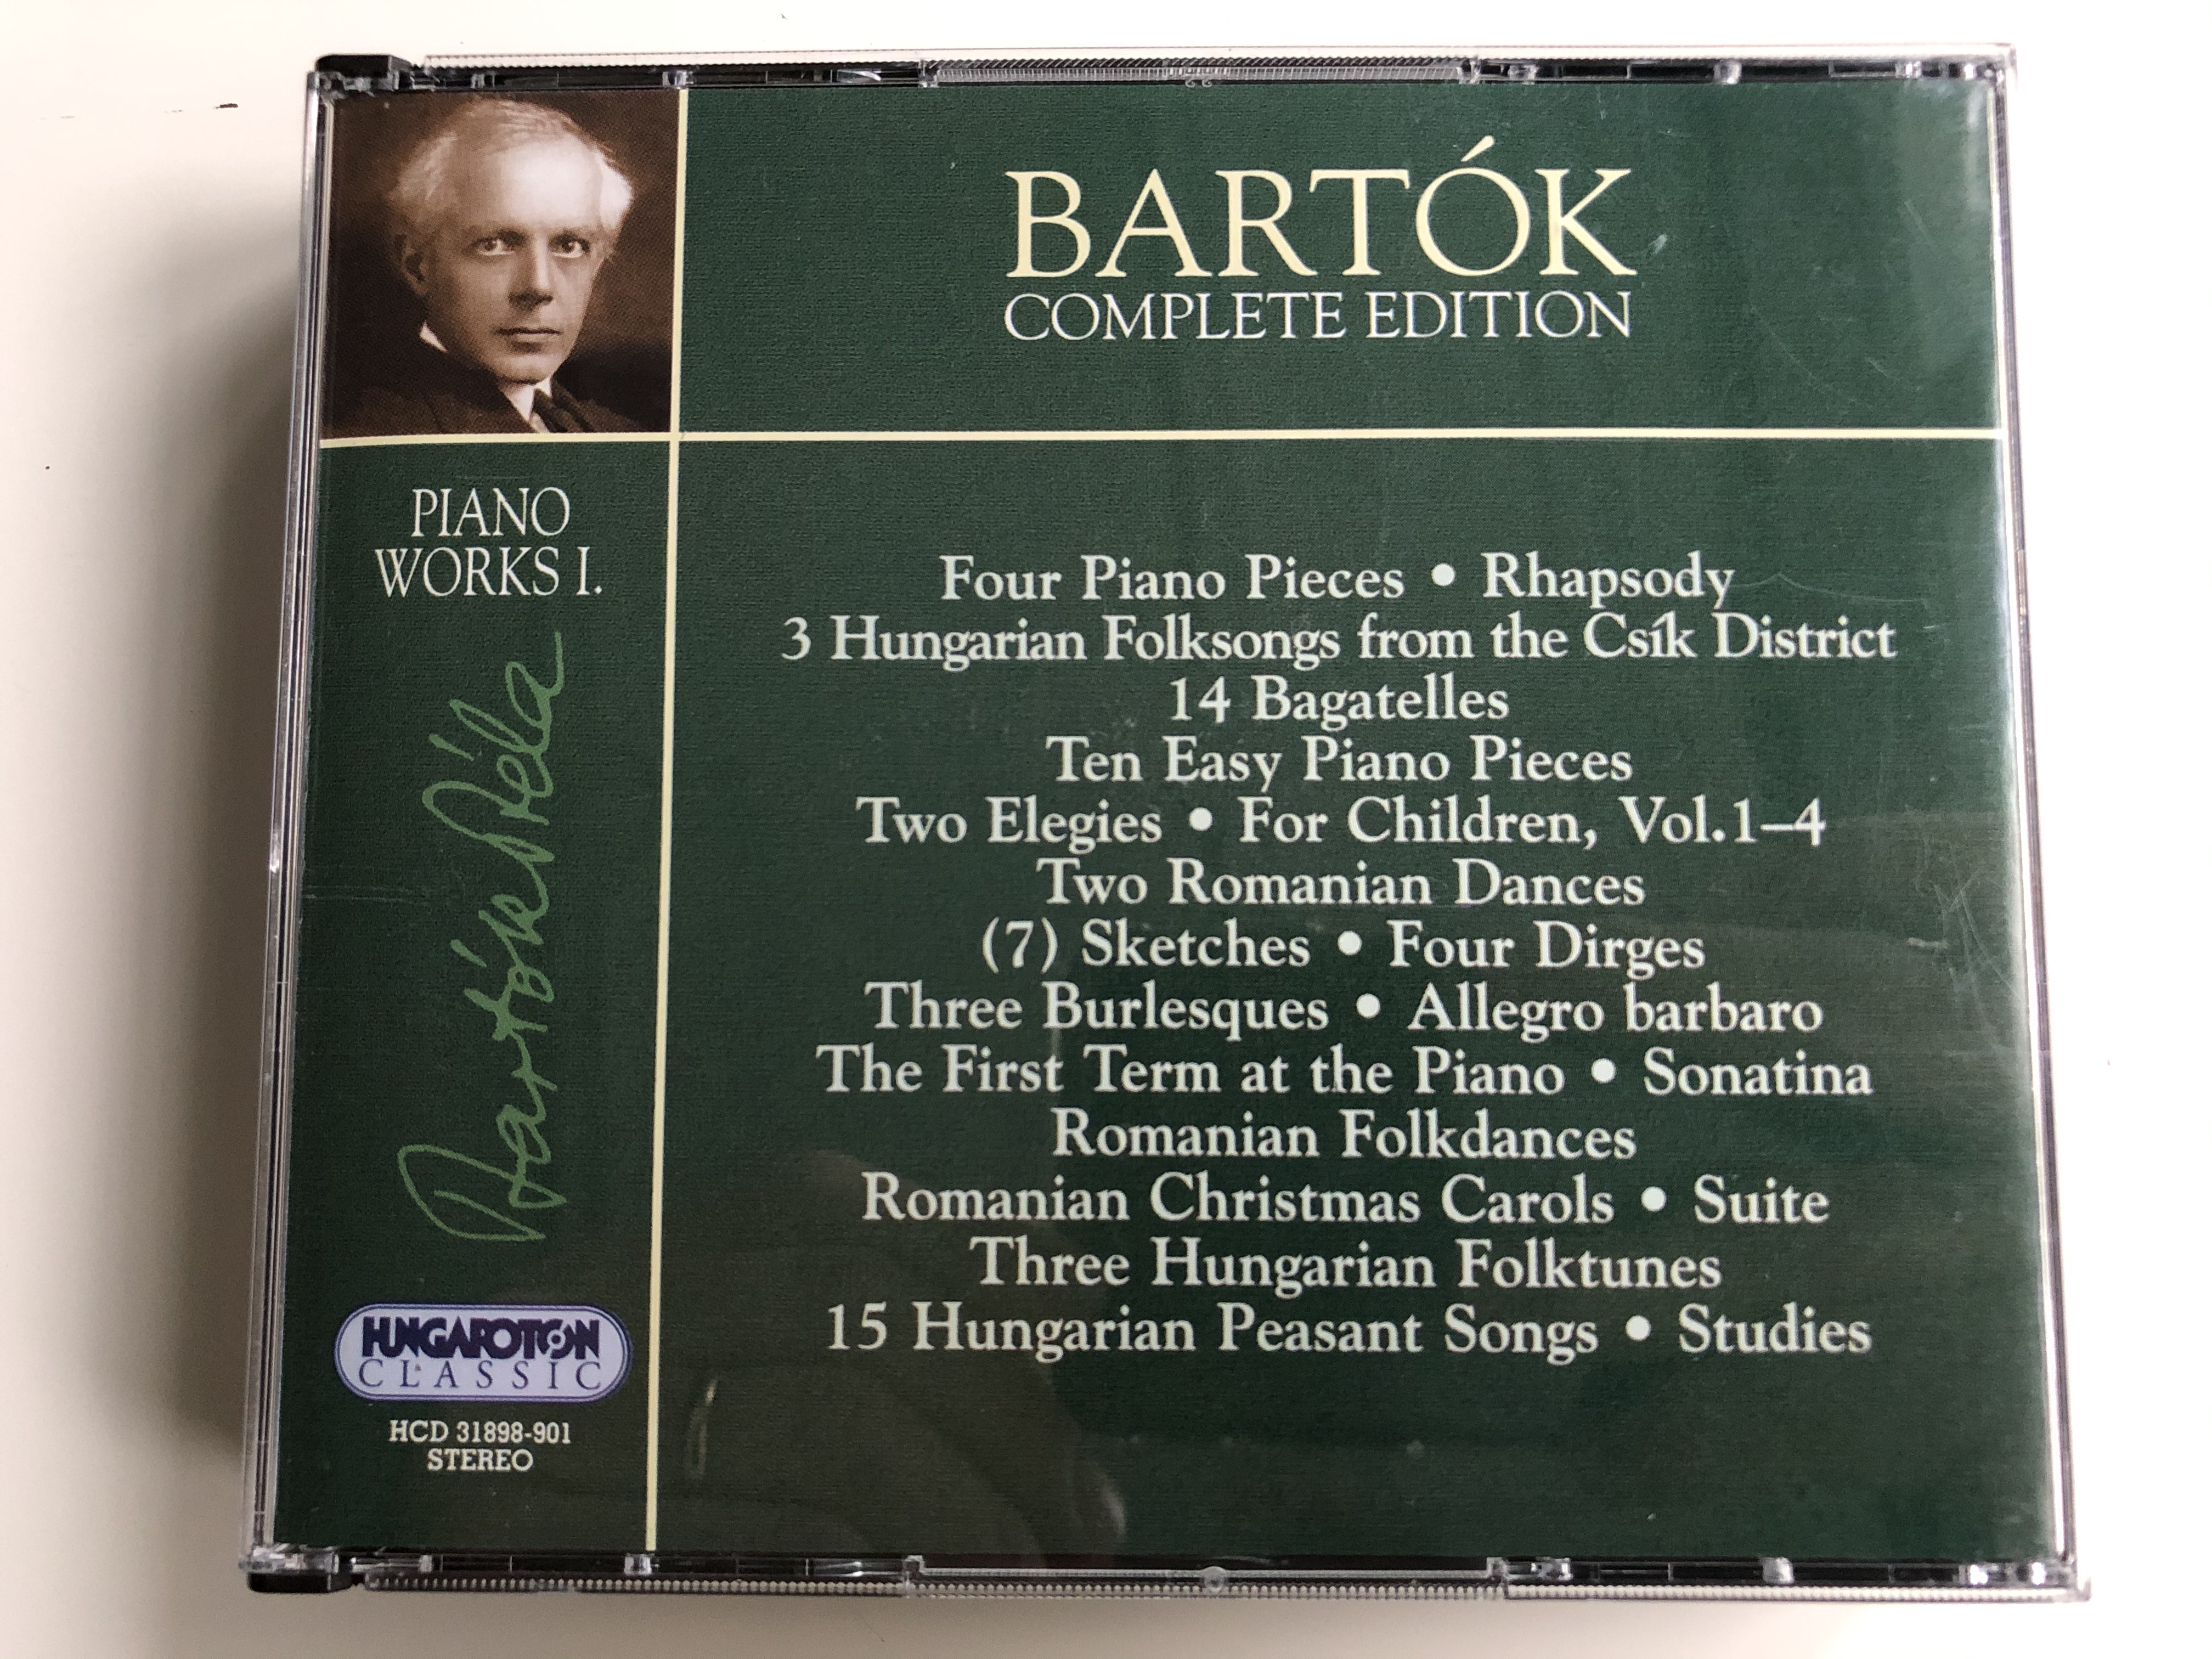 bartok-complete-edition-piano-works-i.-four-piano-pieces-rhapsody-3-hungarian-folksongs-from-the-csik-district-14-bagatelles-ten-easy-piano-pieces-two-elegies-for-children-hungarian-class-1-.jpg